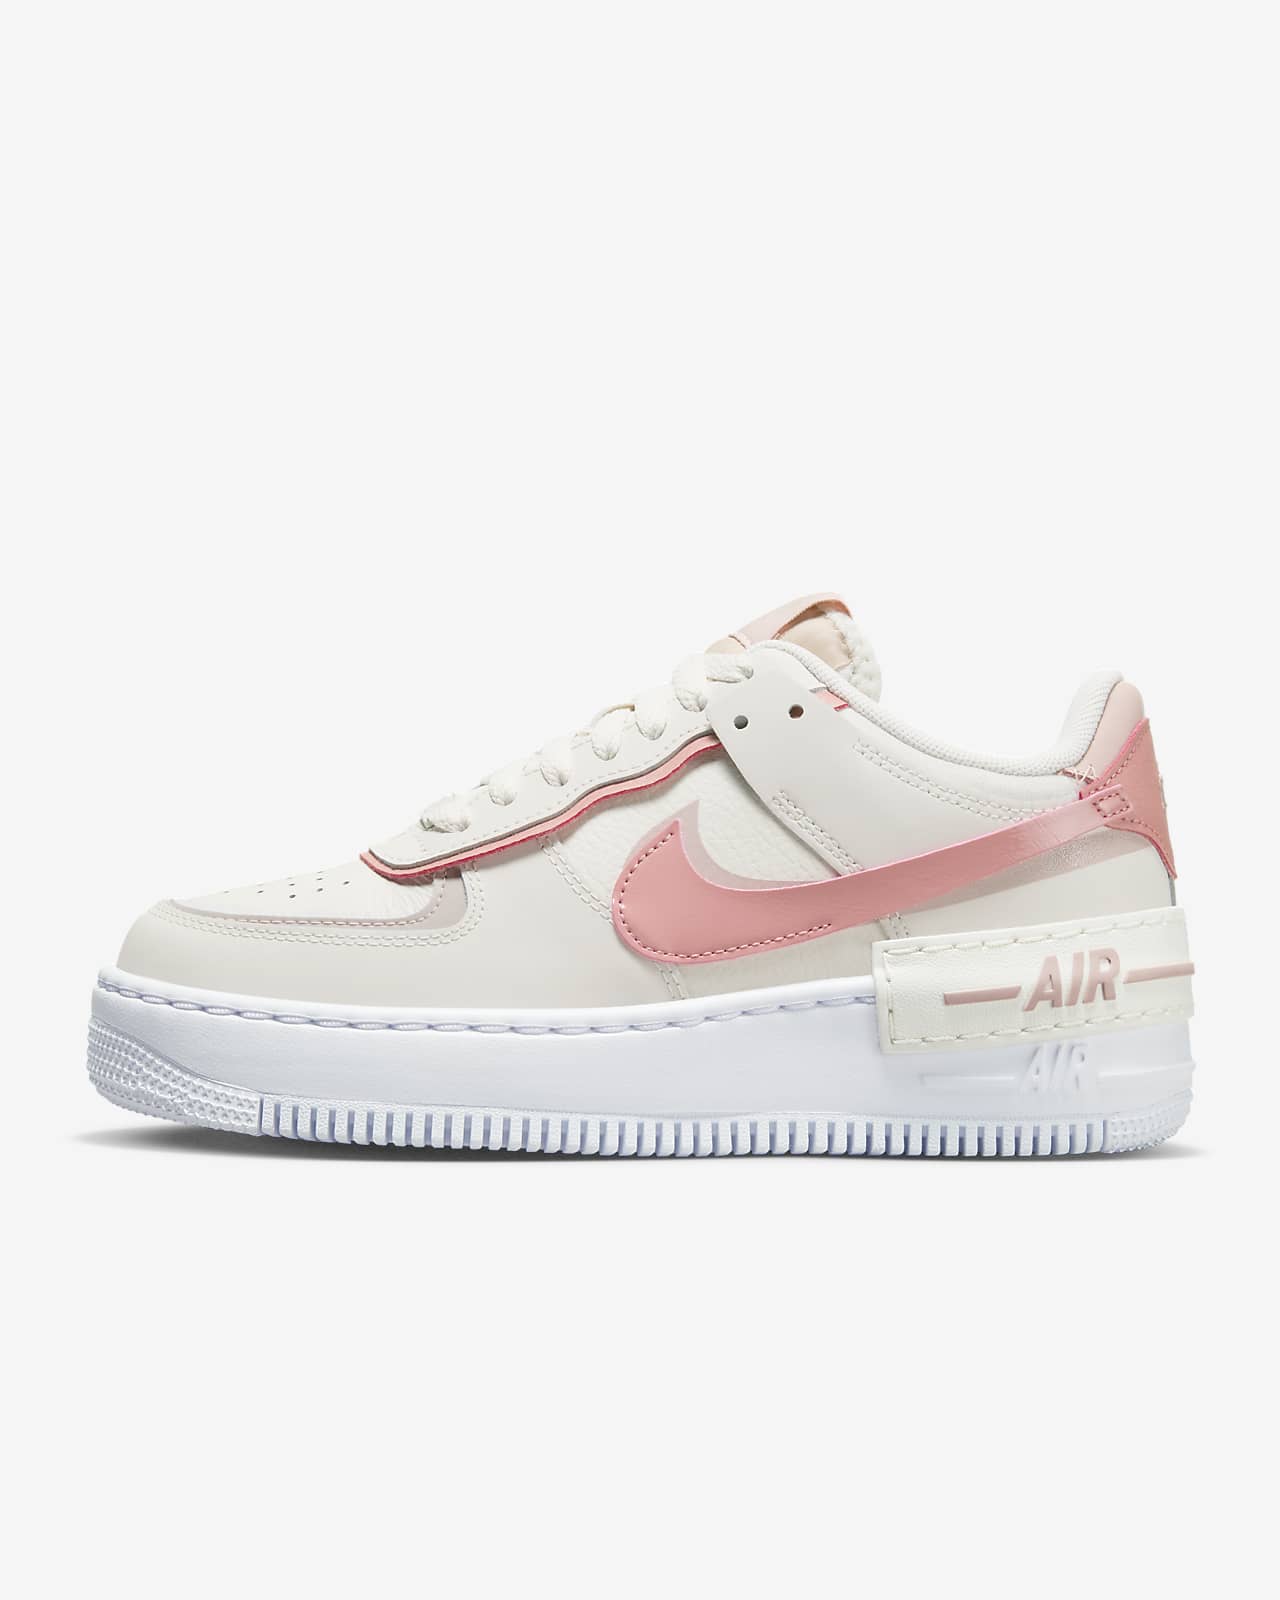 Nike Air Force 1 Shadow Women's Shoes.